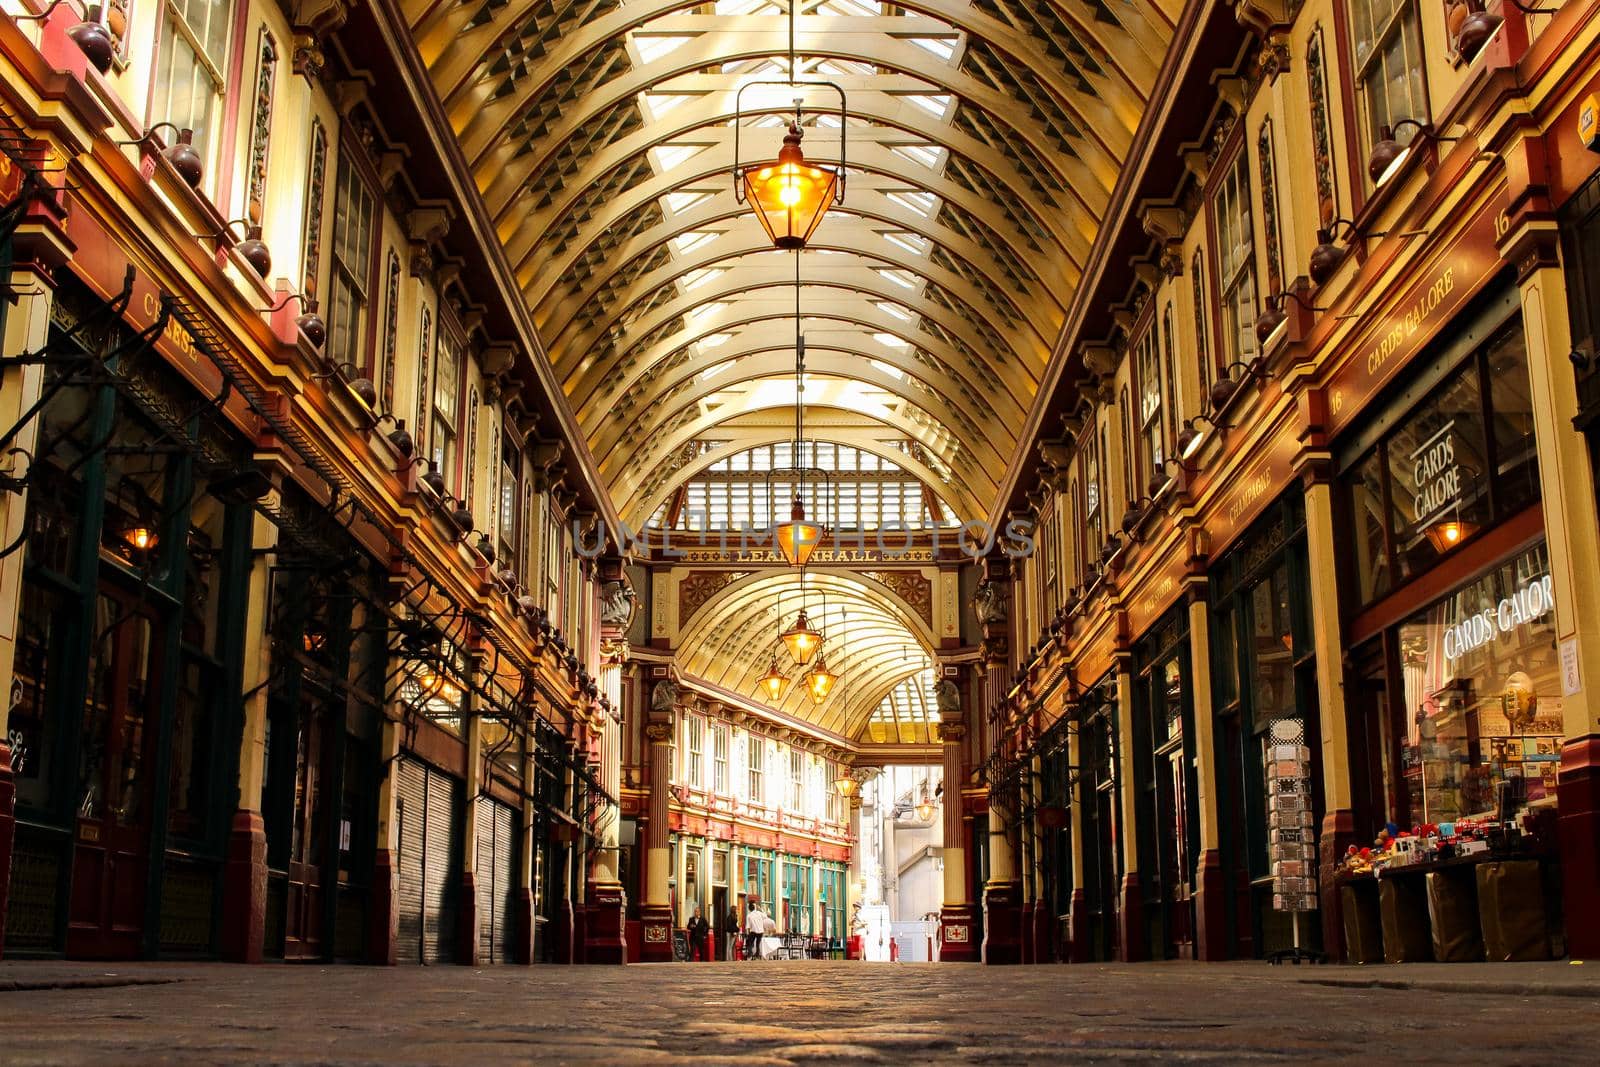 'Leadenhall market' stores and architecture from a worms' eye view, central London, UK. High quality photo.